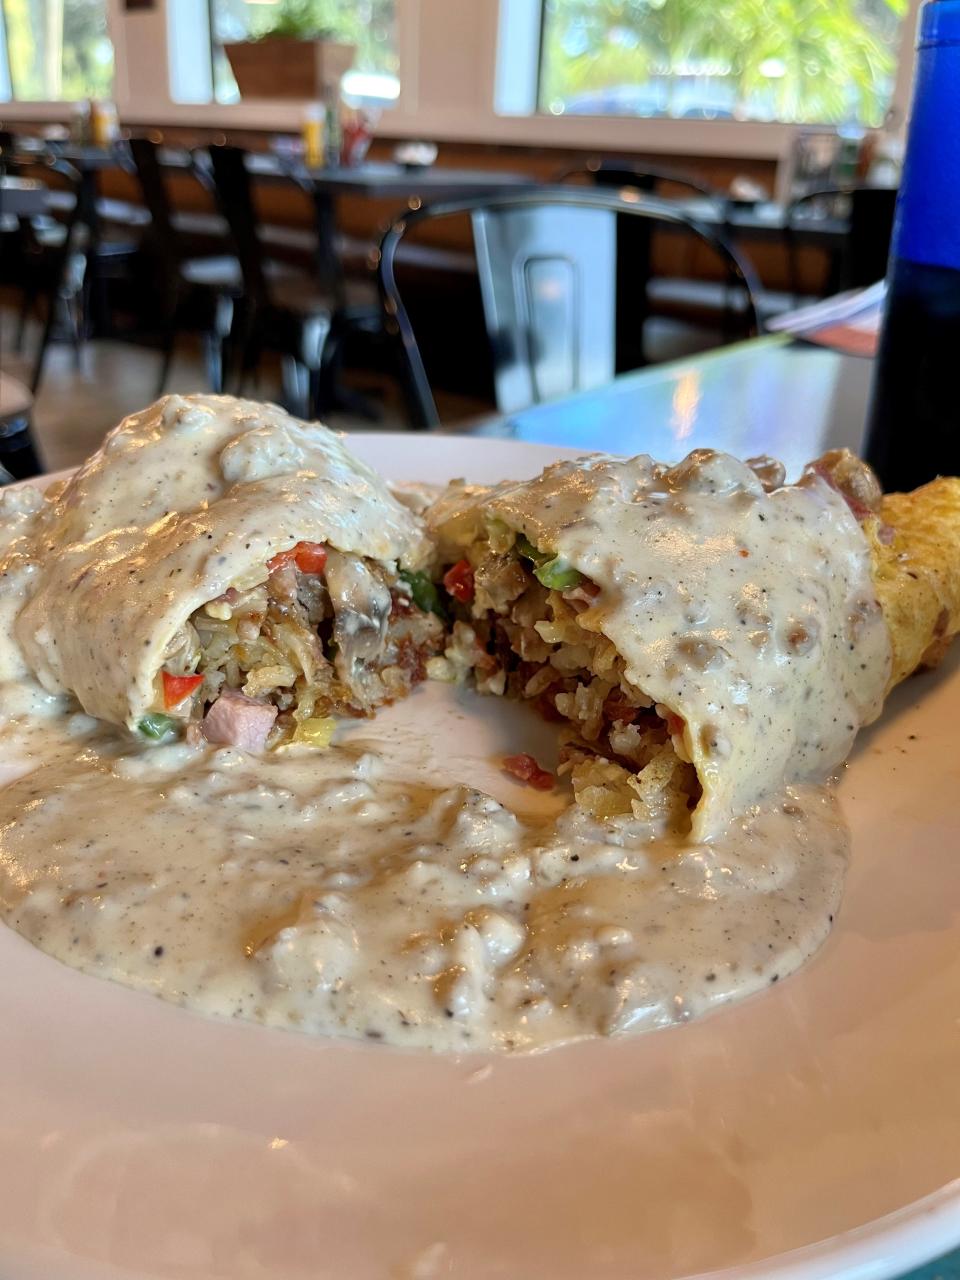 Motor City Coney Island's MCC omelet is made with four eggs, bacon, ham, sausage, sautéed onions, peppers, mushrooms and shredded cheese. Sausage gravy comes on top or on the side.